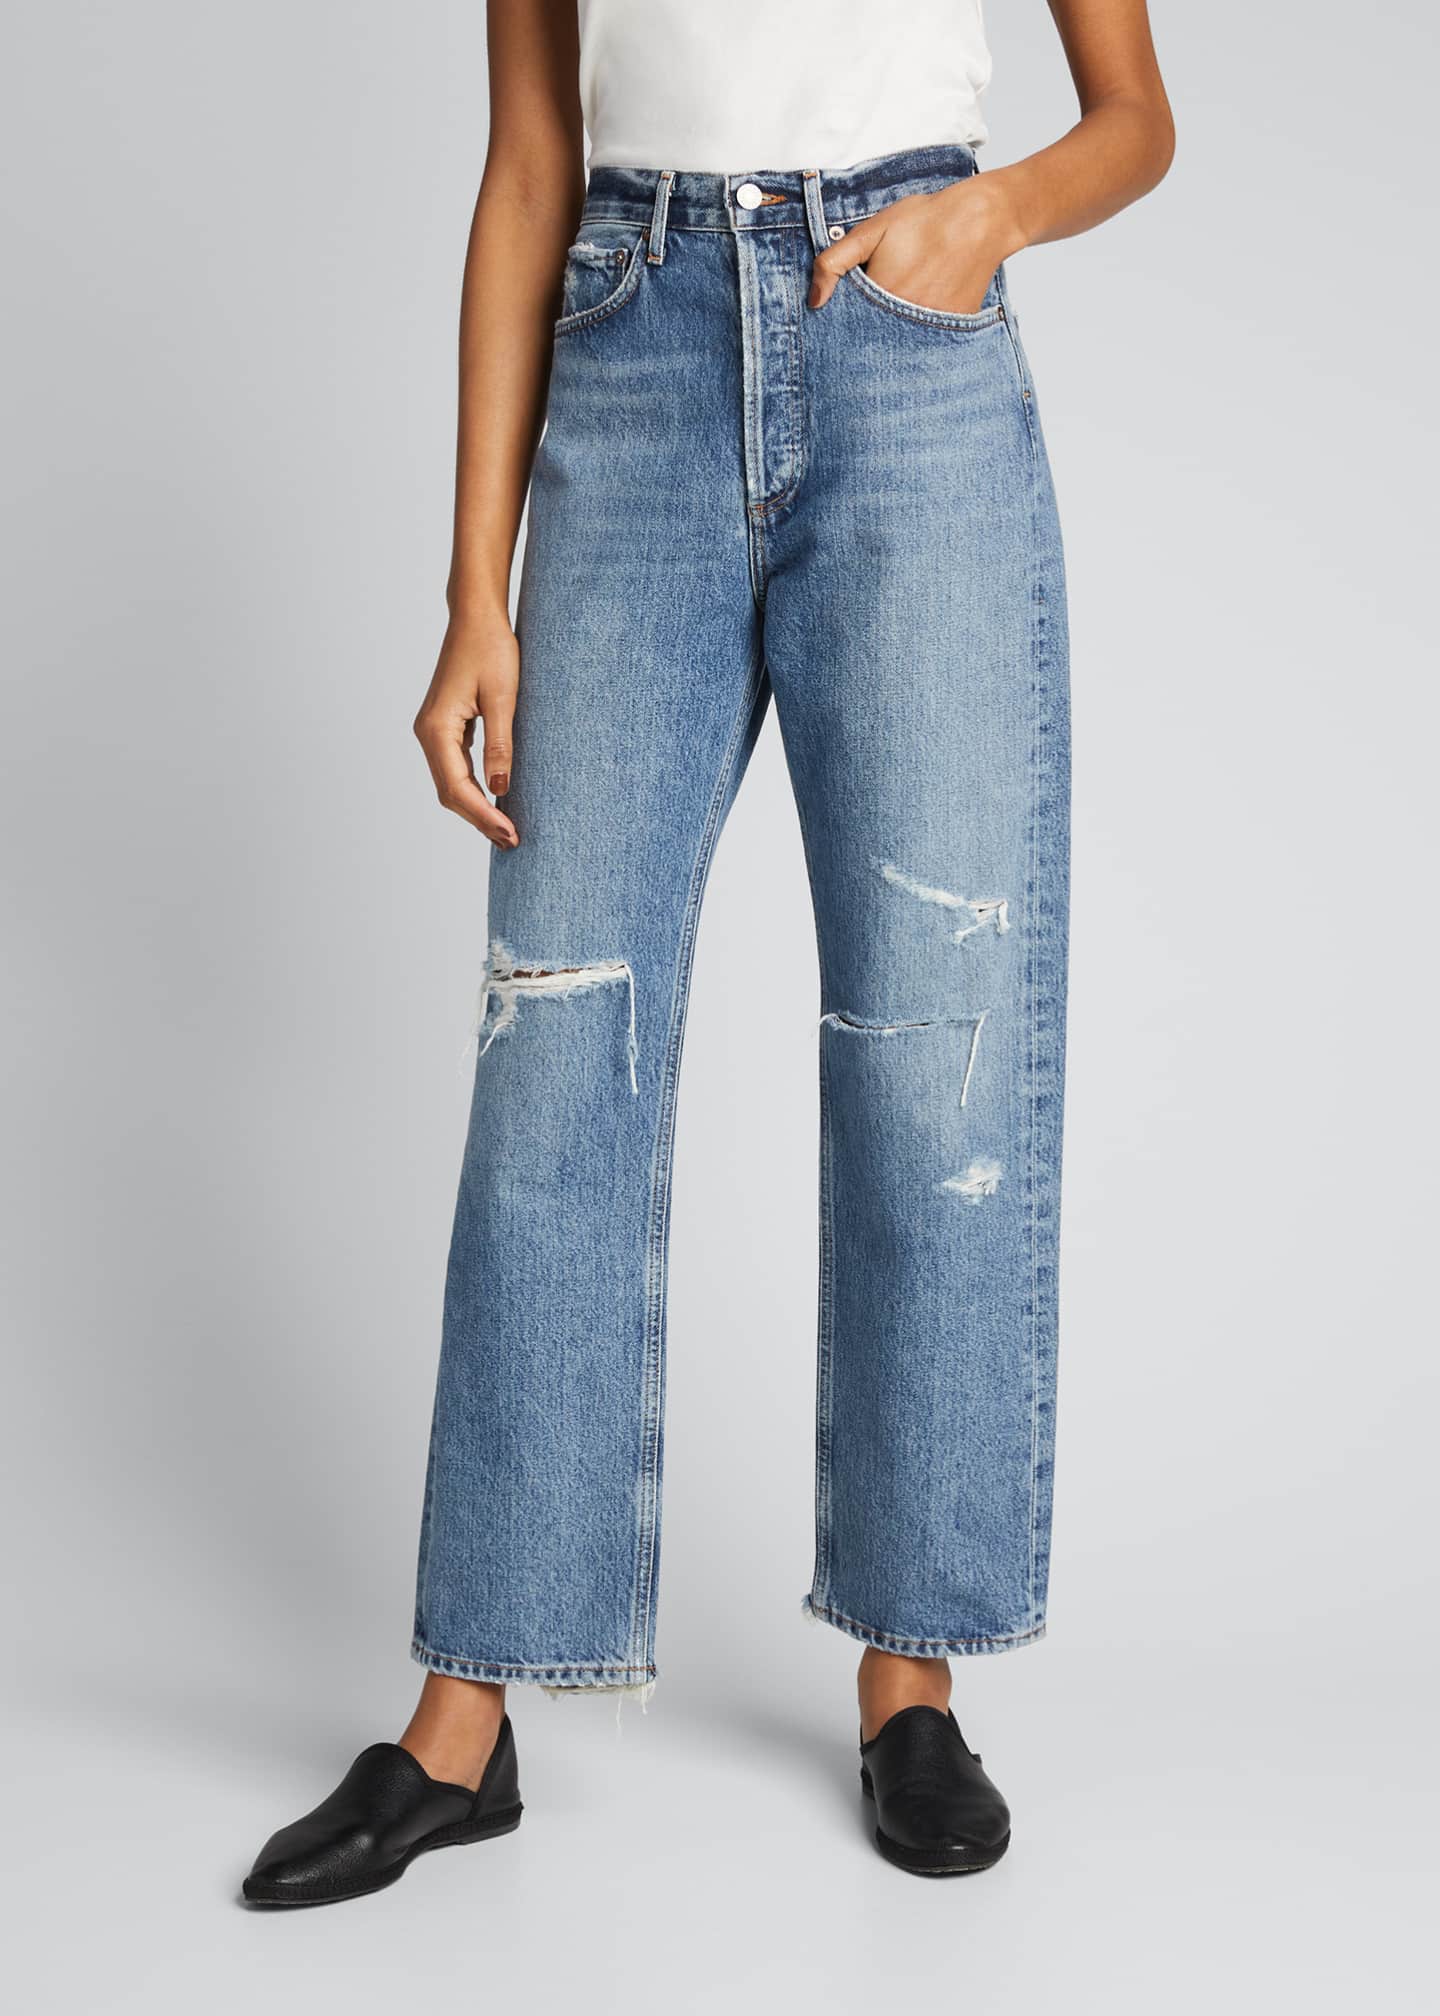 AGOLDE 90s Distressed High-Rise Jeans - Bergdorf Goodman